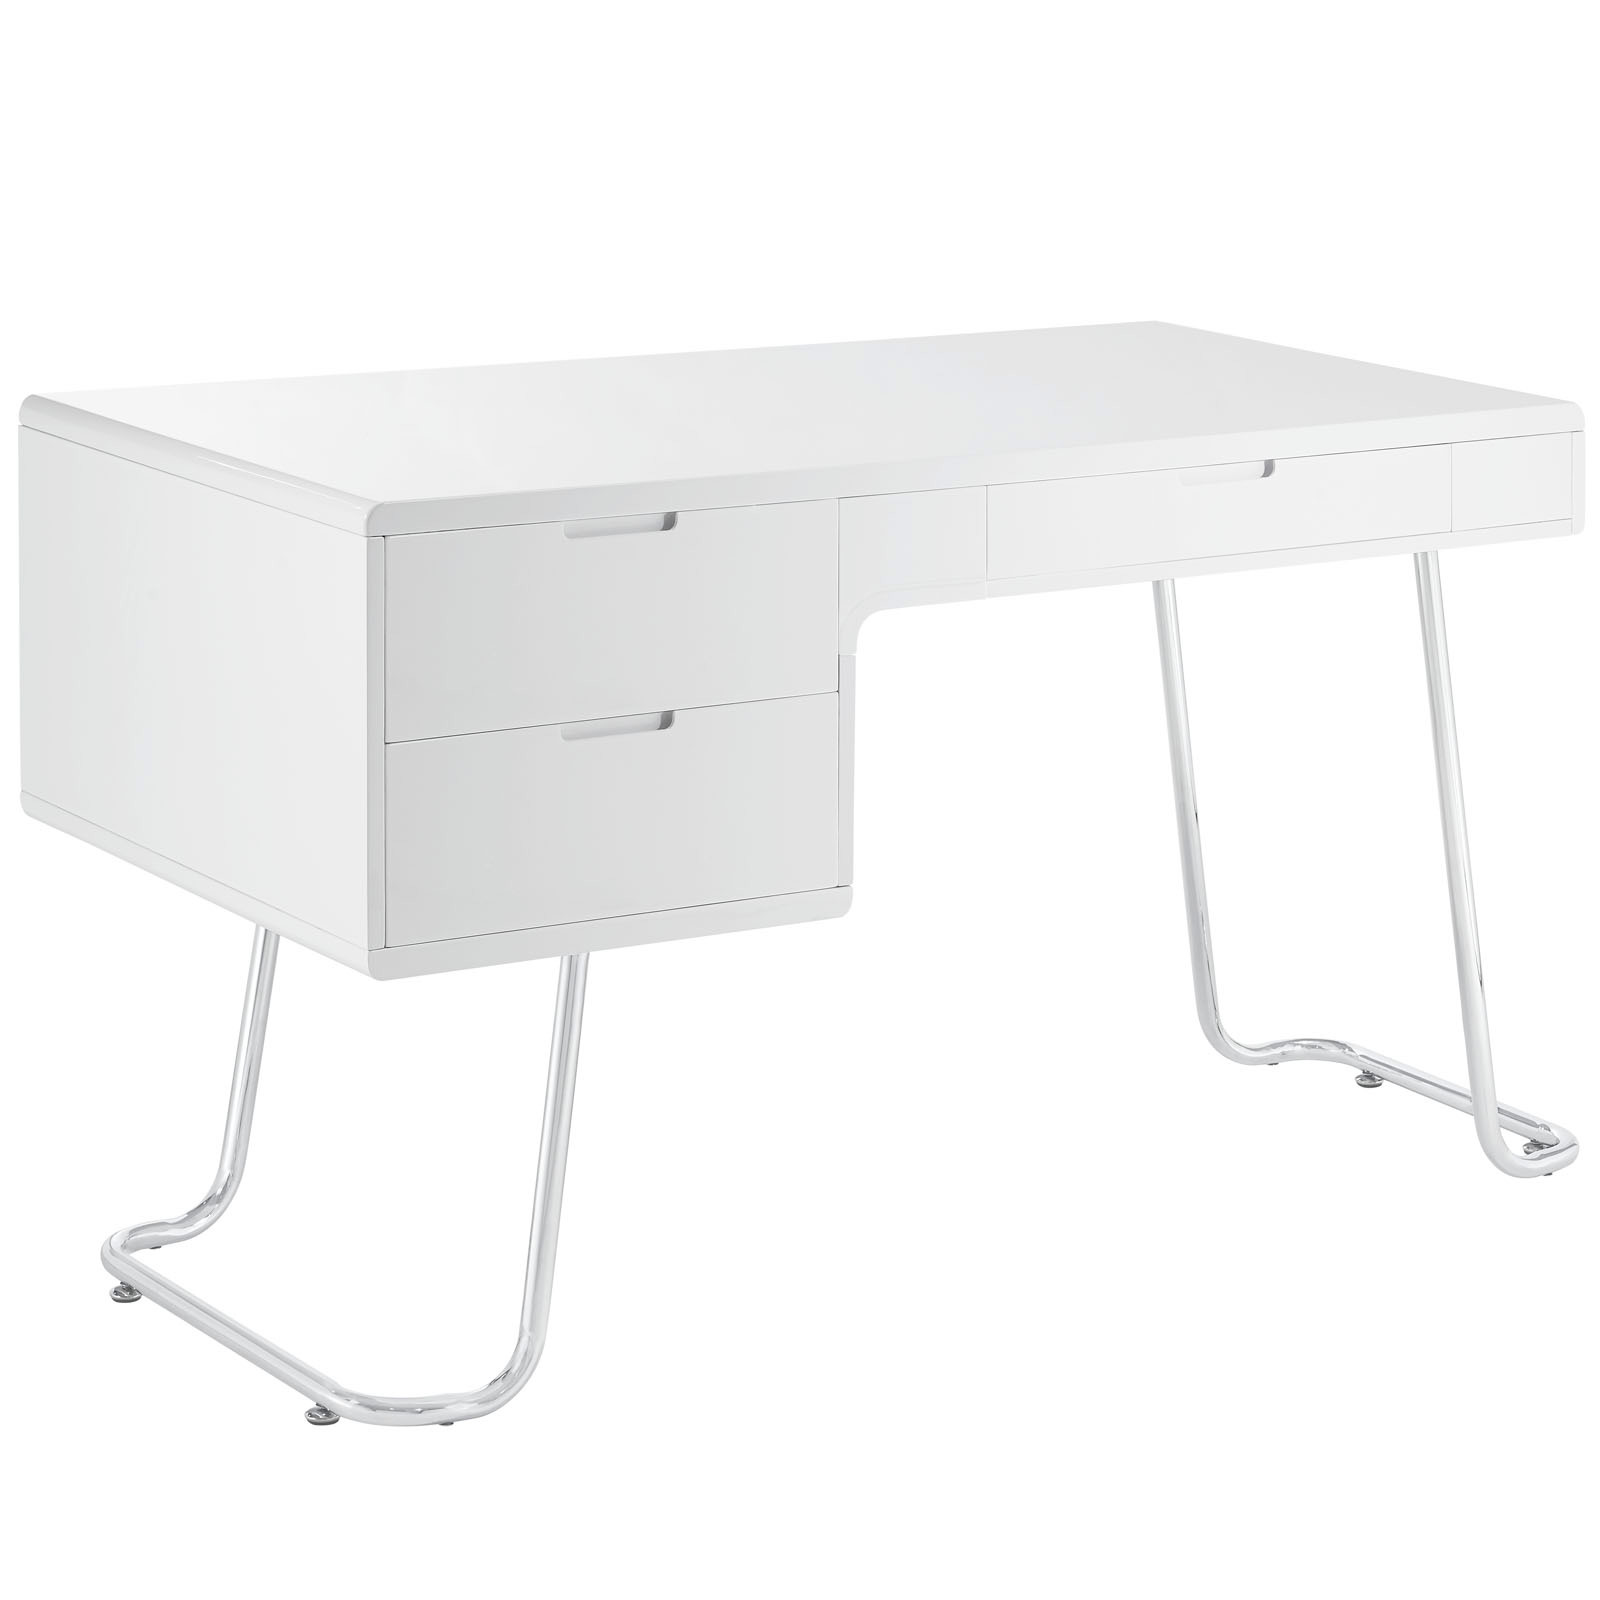 White Office Desk - Space Saving Desk - Computer Desk For Small Spaces